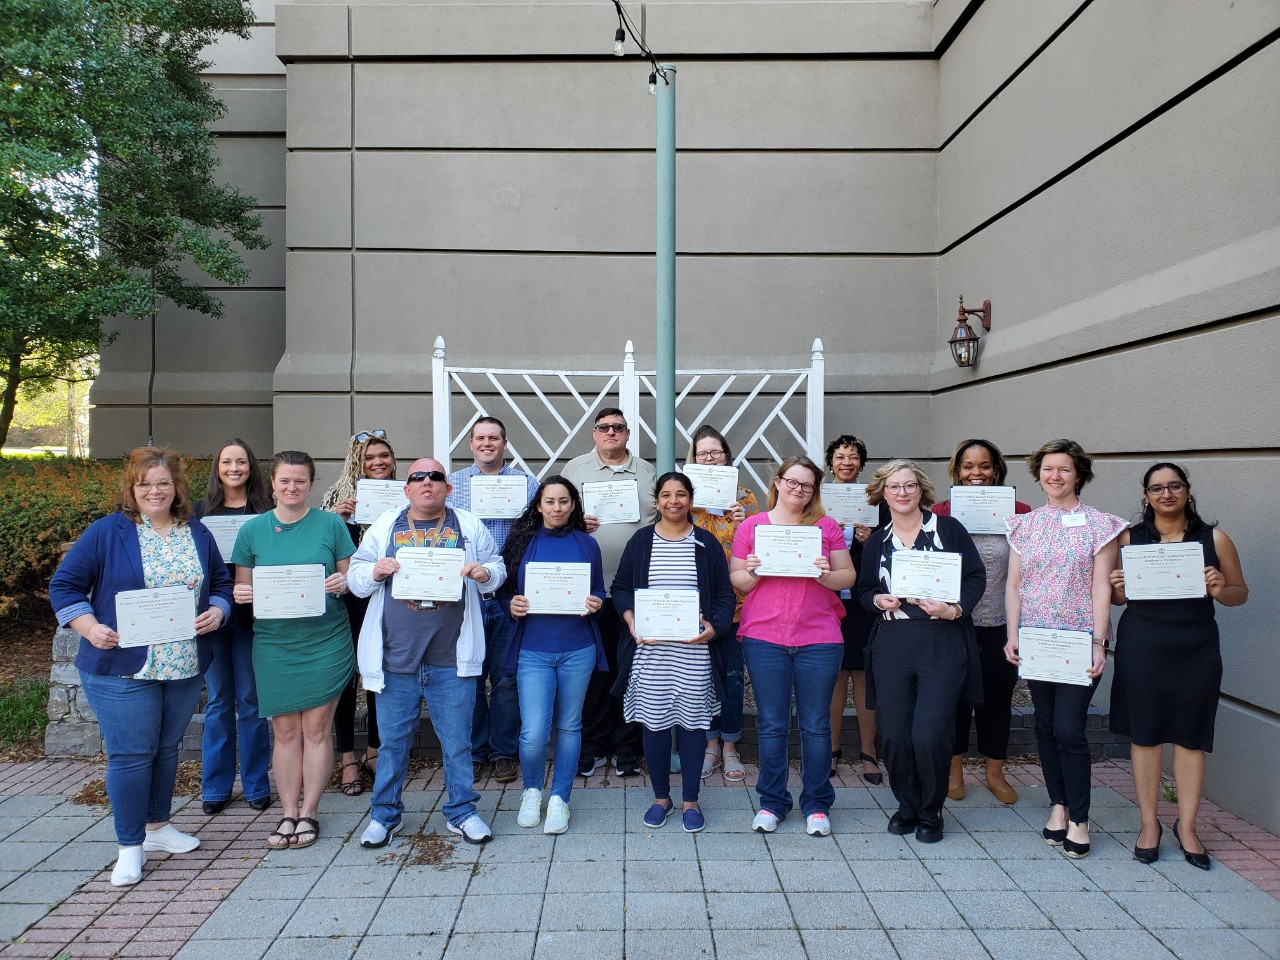 a diverse group of about 20 adults with and without disabilities pose for a group photo in the hotel courtyard holding up their Partners paper certificates.